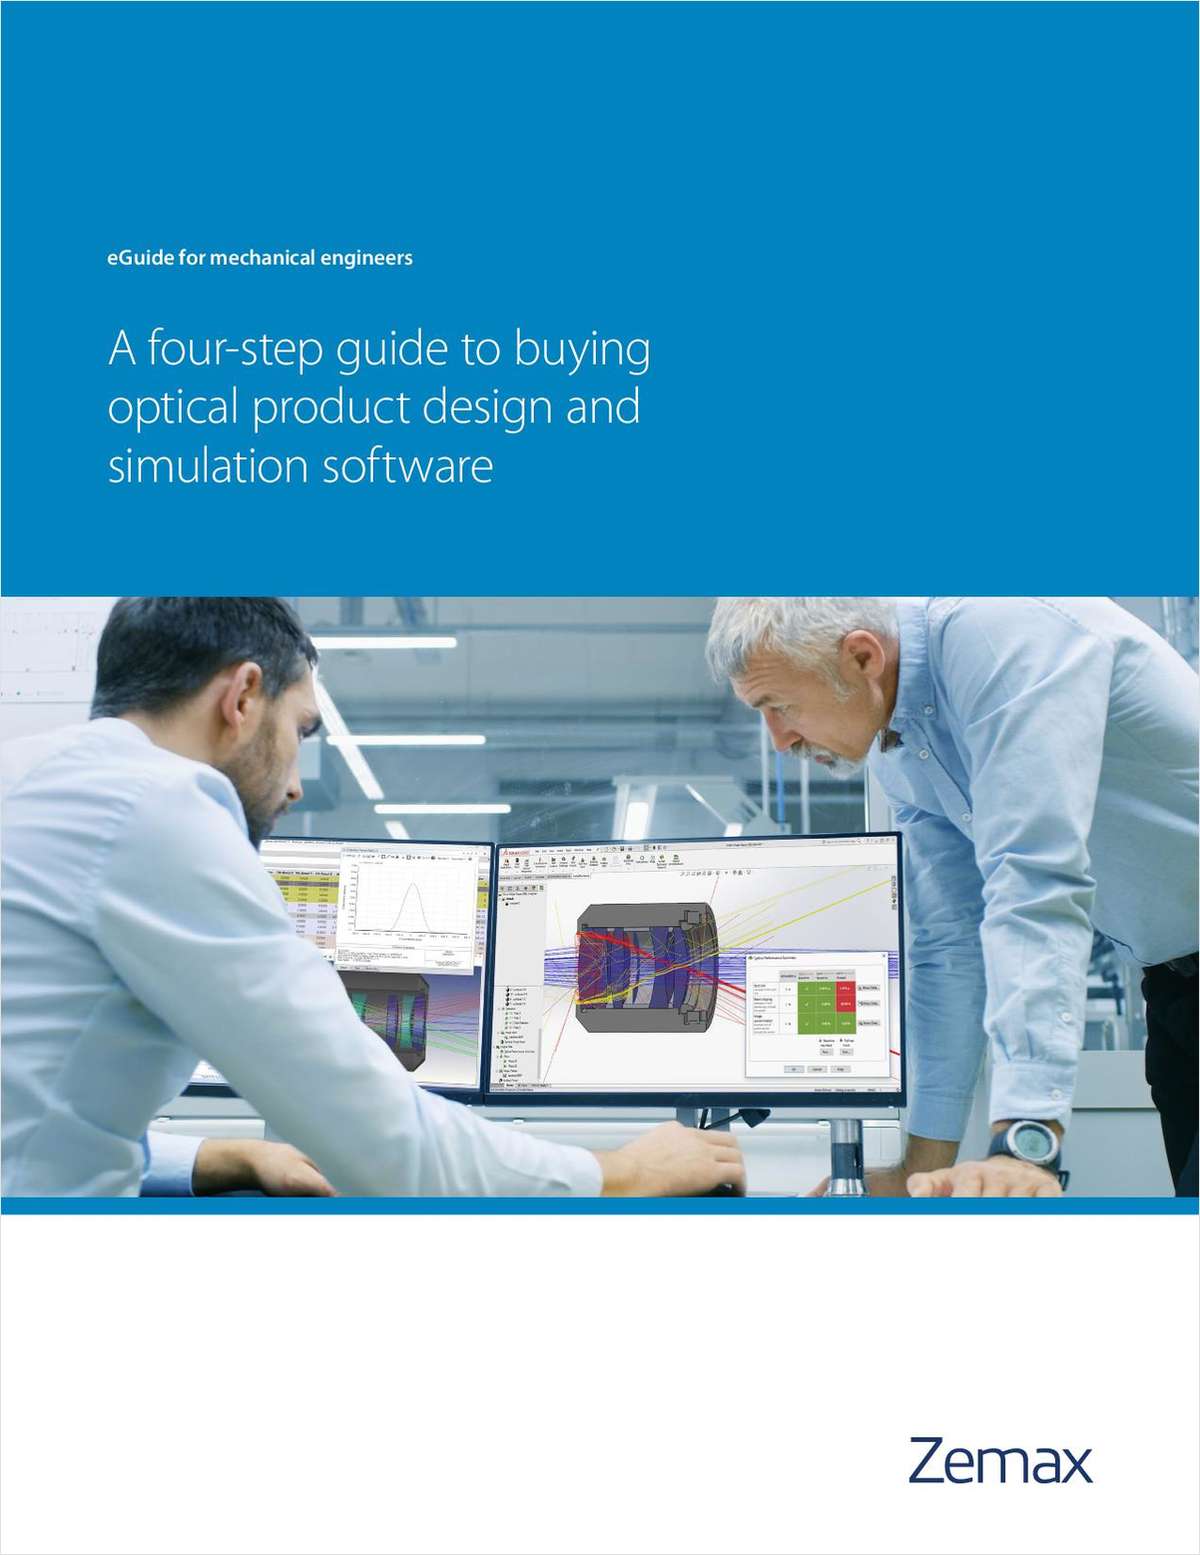 A Four-Step Guide to Buying Optical Product Design and Simulation Software